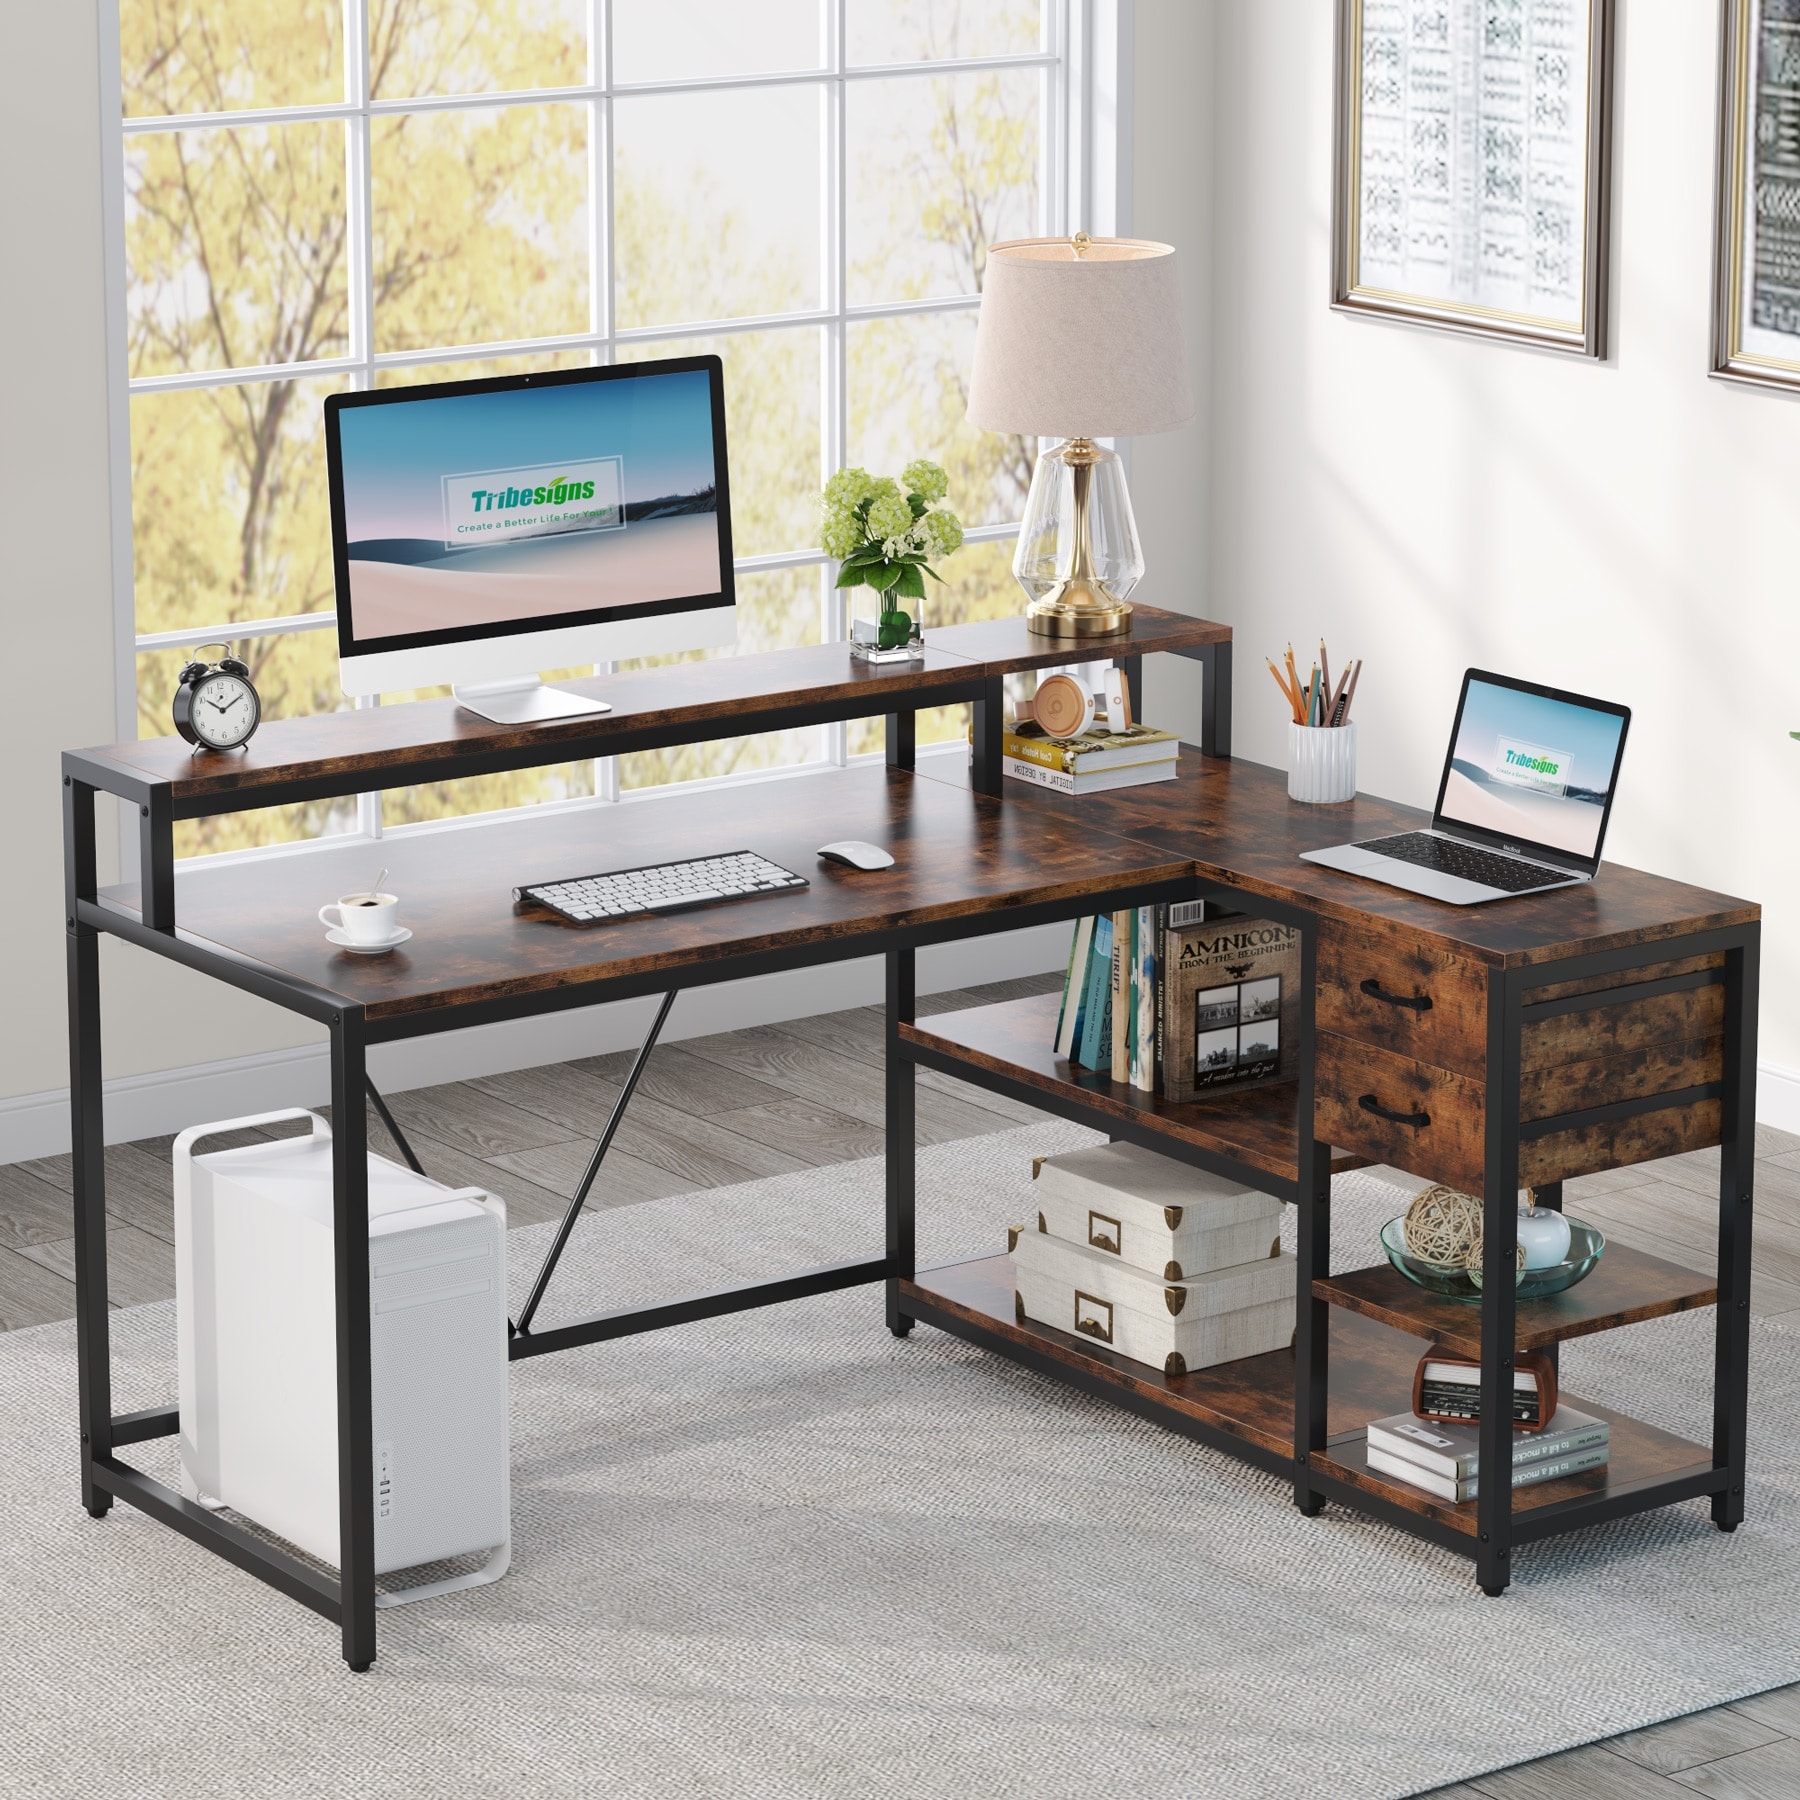 https://ak1.ostkcdn.com/images/products/is/images/direct/f3cba8056c872e67f66f3d051184fbc9b81e2746/L-Shaped-Desk-with-Drawer%2C-Home-Office-Corner-Desk-with-Storage-Shelves-and-Monitor-Stand%2C-Rustic-PC-Desk-for-Small-Space.jpg